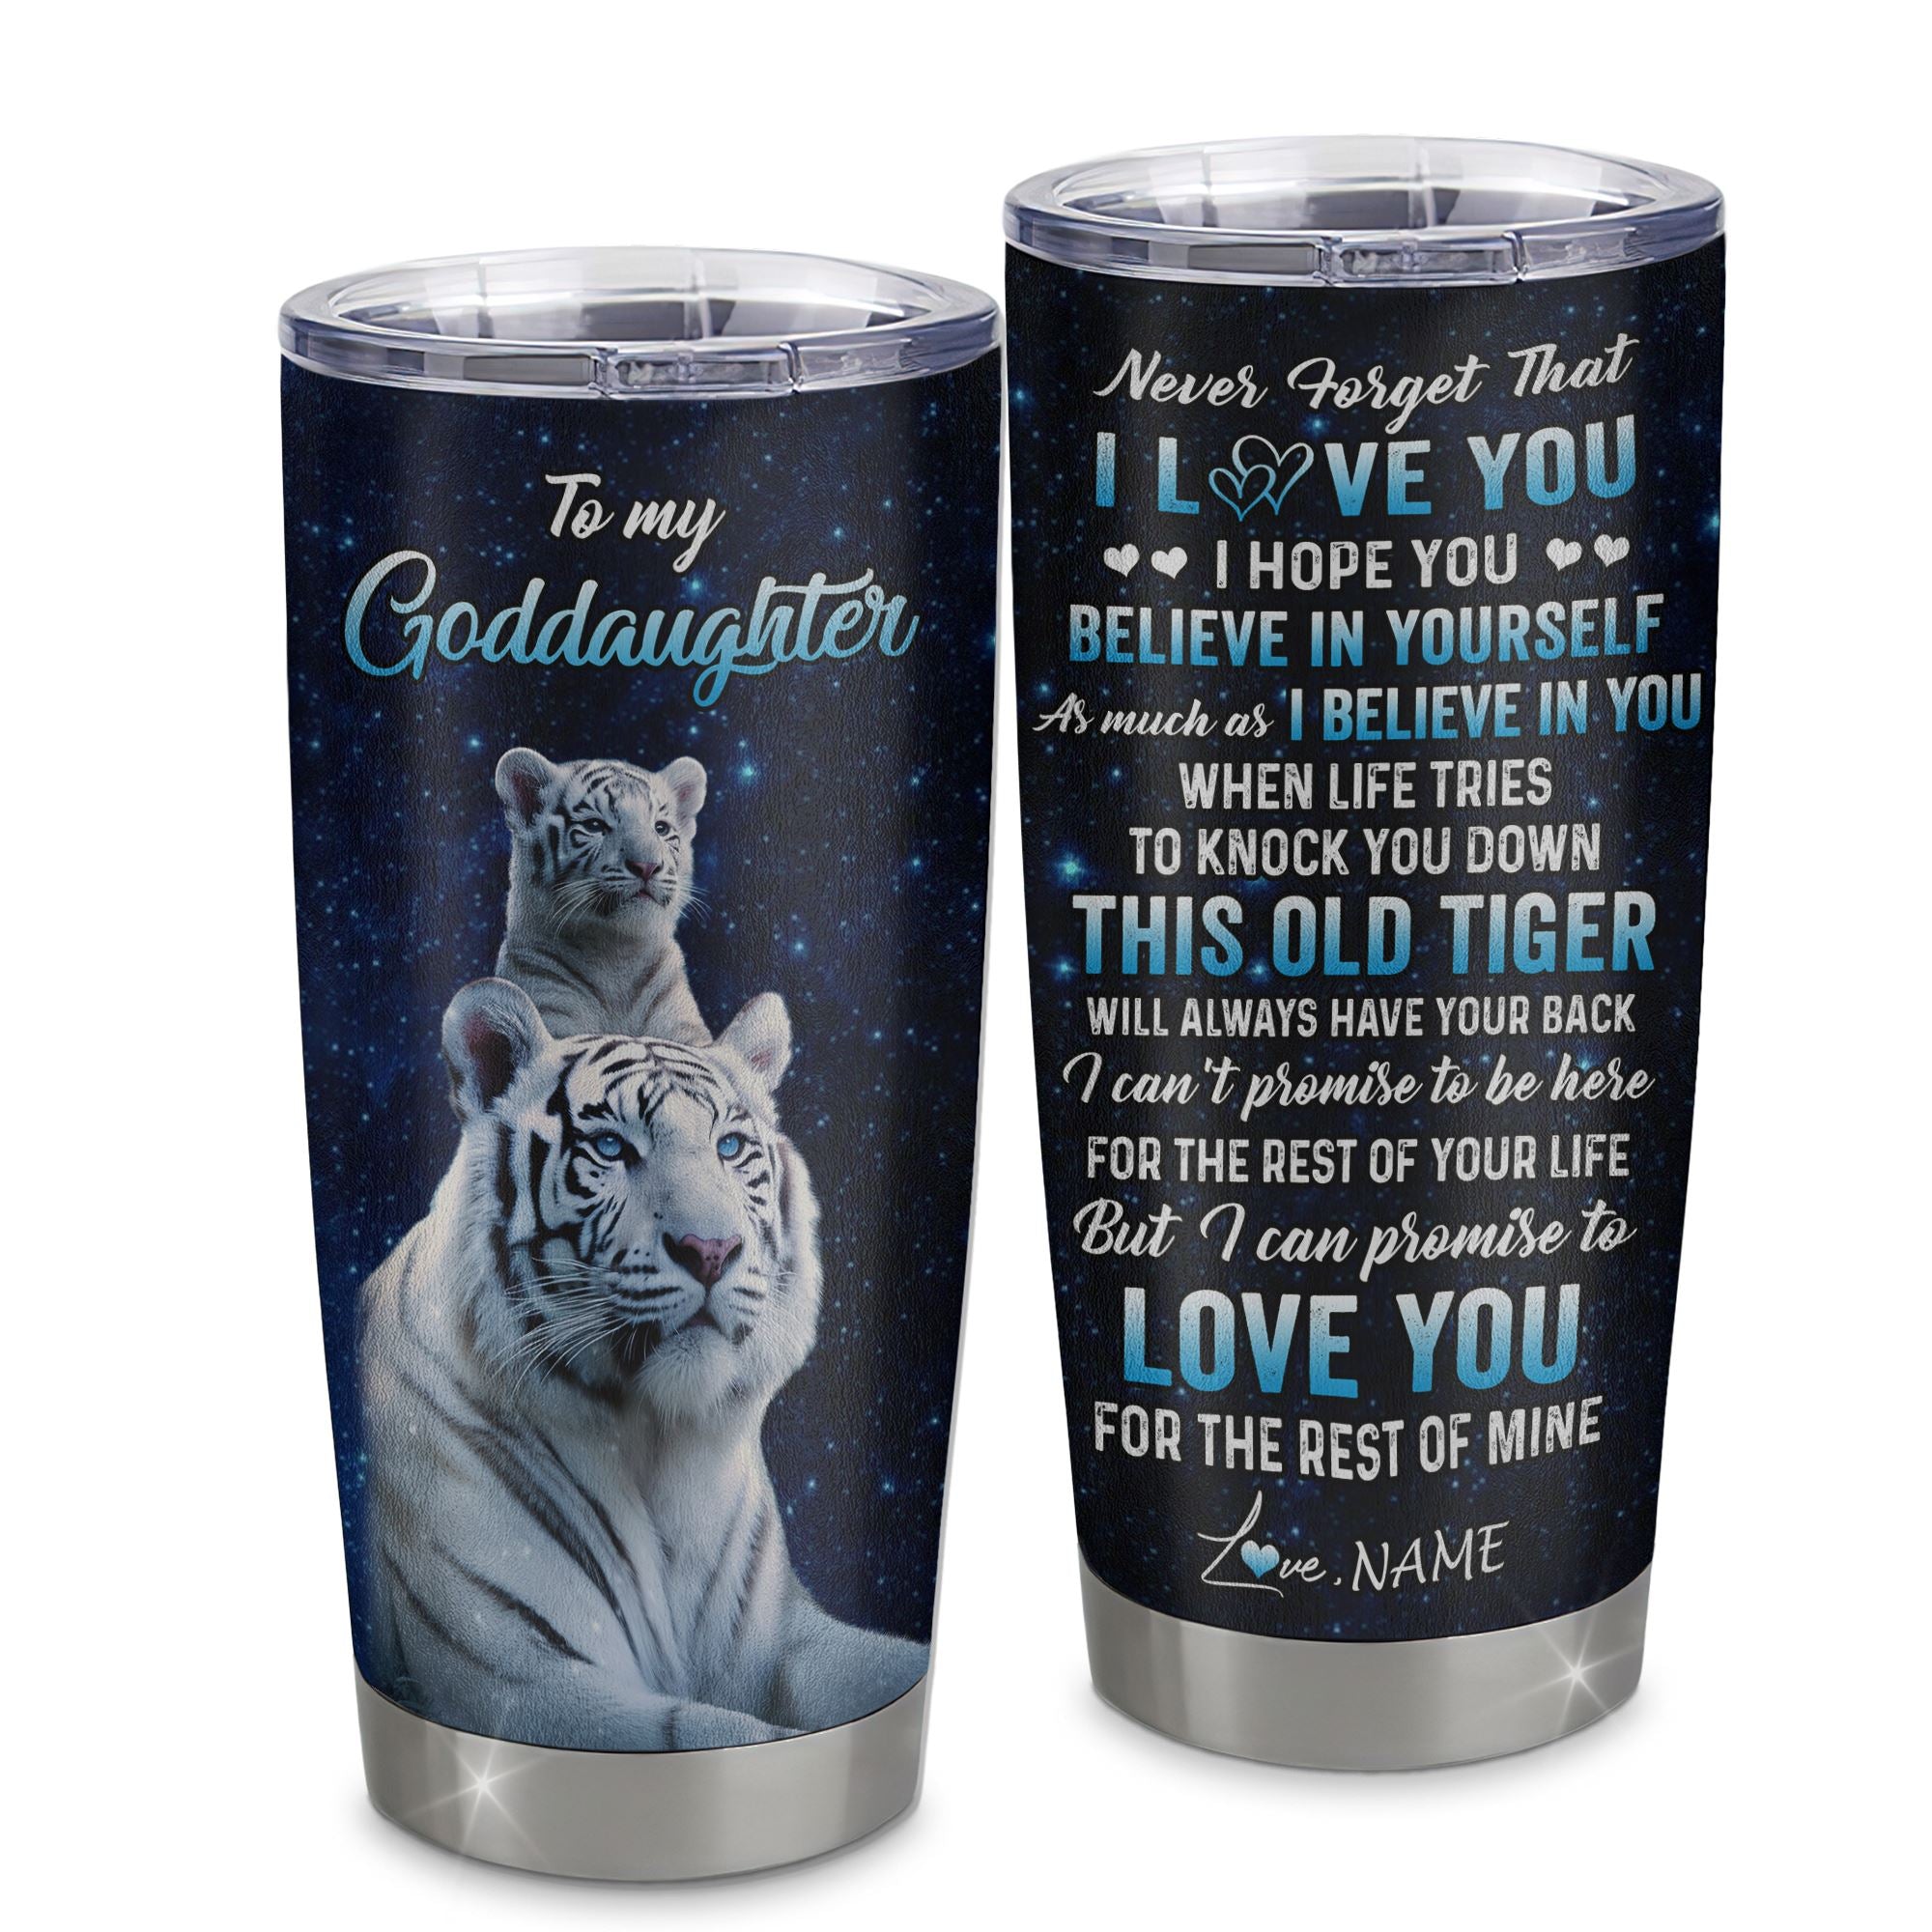 Personalized_To_My_Goddaughter_Tumbler_Gift_From_Godmother_Aunt_Stainless_Steel_This_Old_Tiger_Love_You_Goddaughter_Birthday_Graduation_Christmas_Travel_Mug_Tumbler_mockup_1.jpg